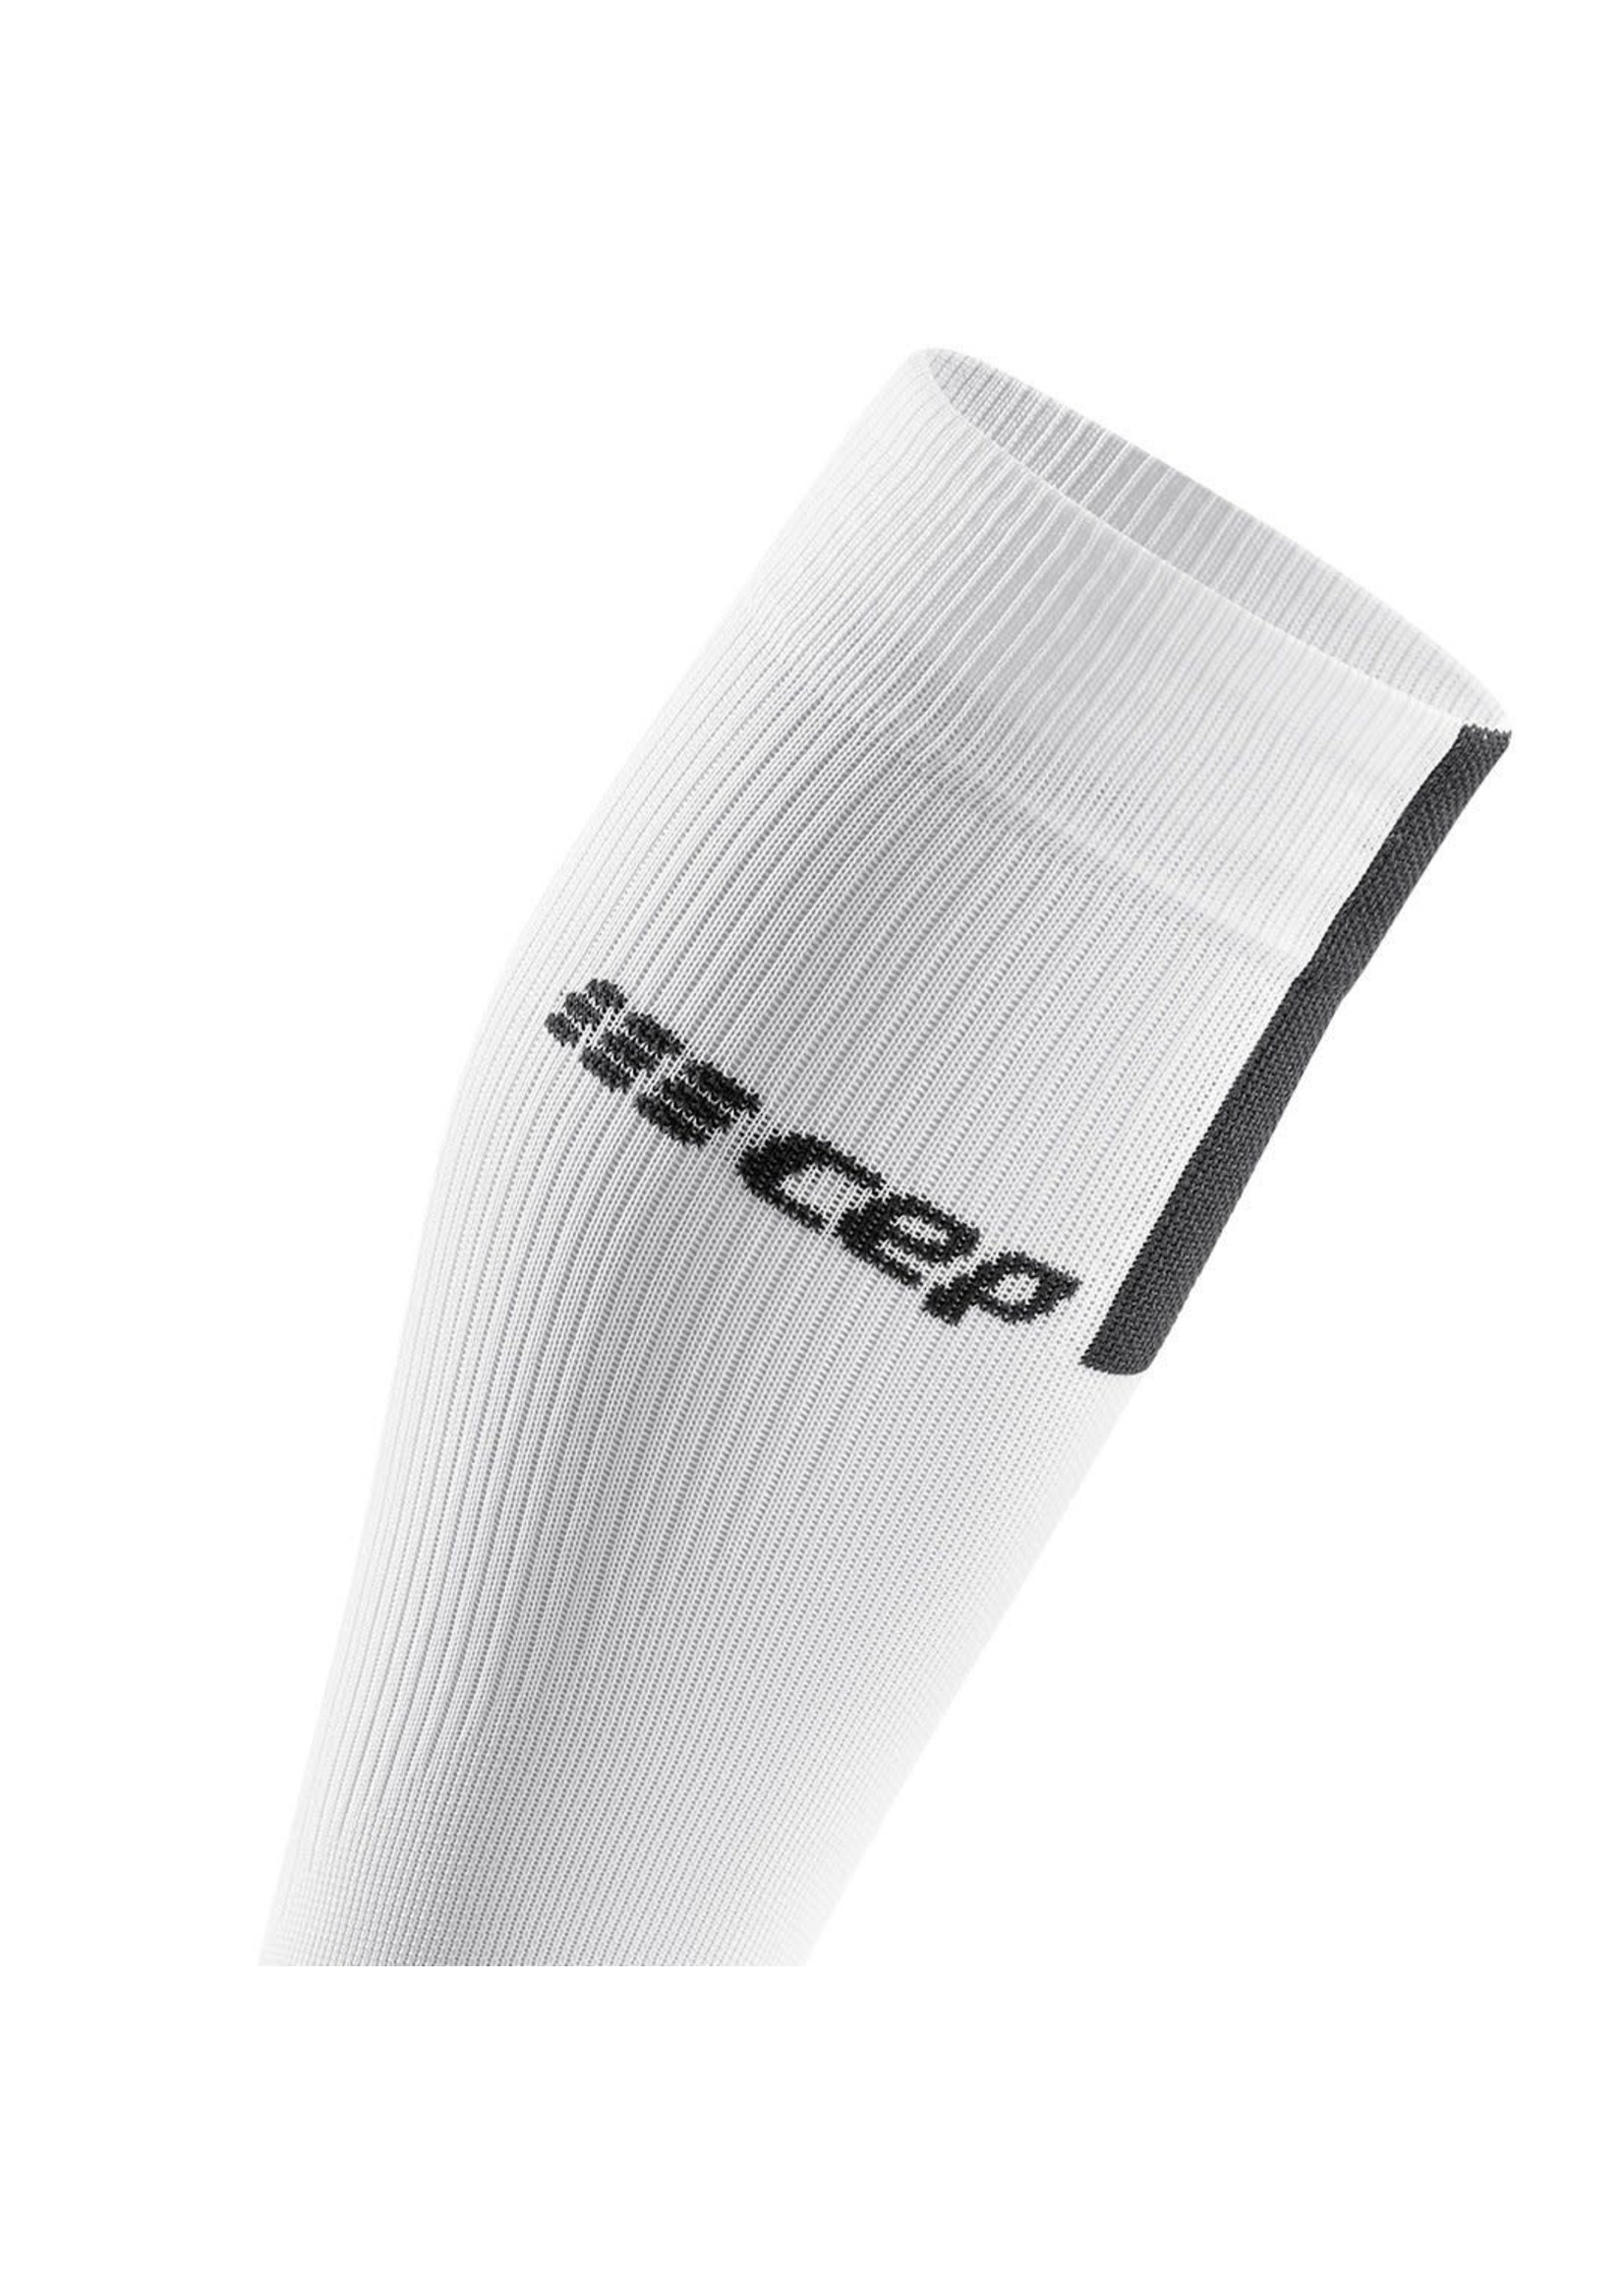 CEP COMPRESSION CALF SLEEVES WOMEN